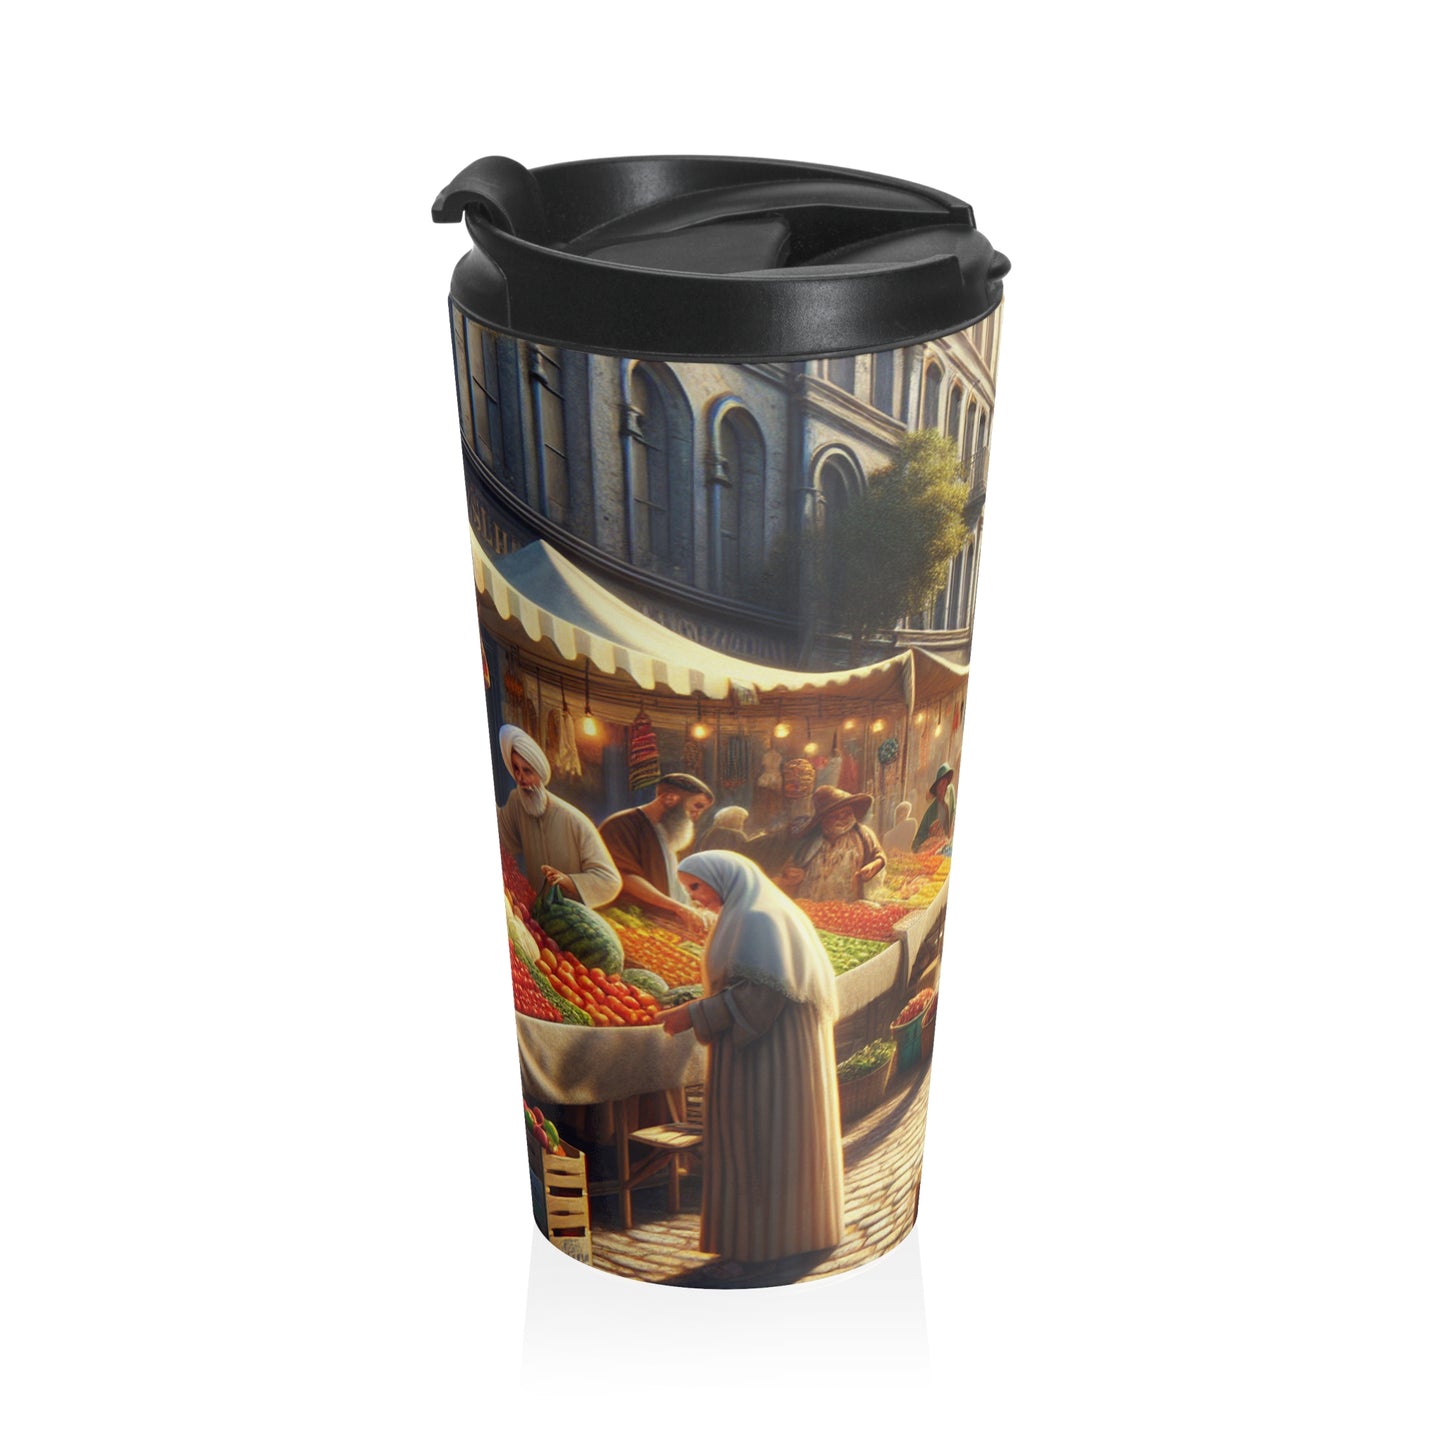 "Sunny Vibes at the Outdoor Market" - The Alien Stainless Steel Travel Mug Realism Style